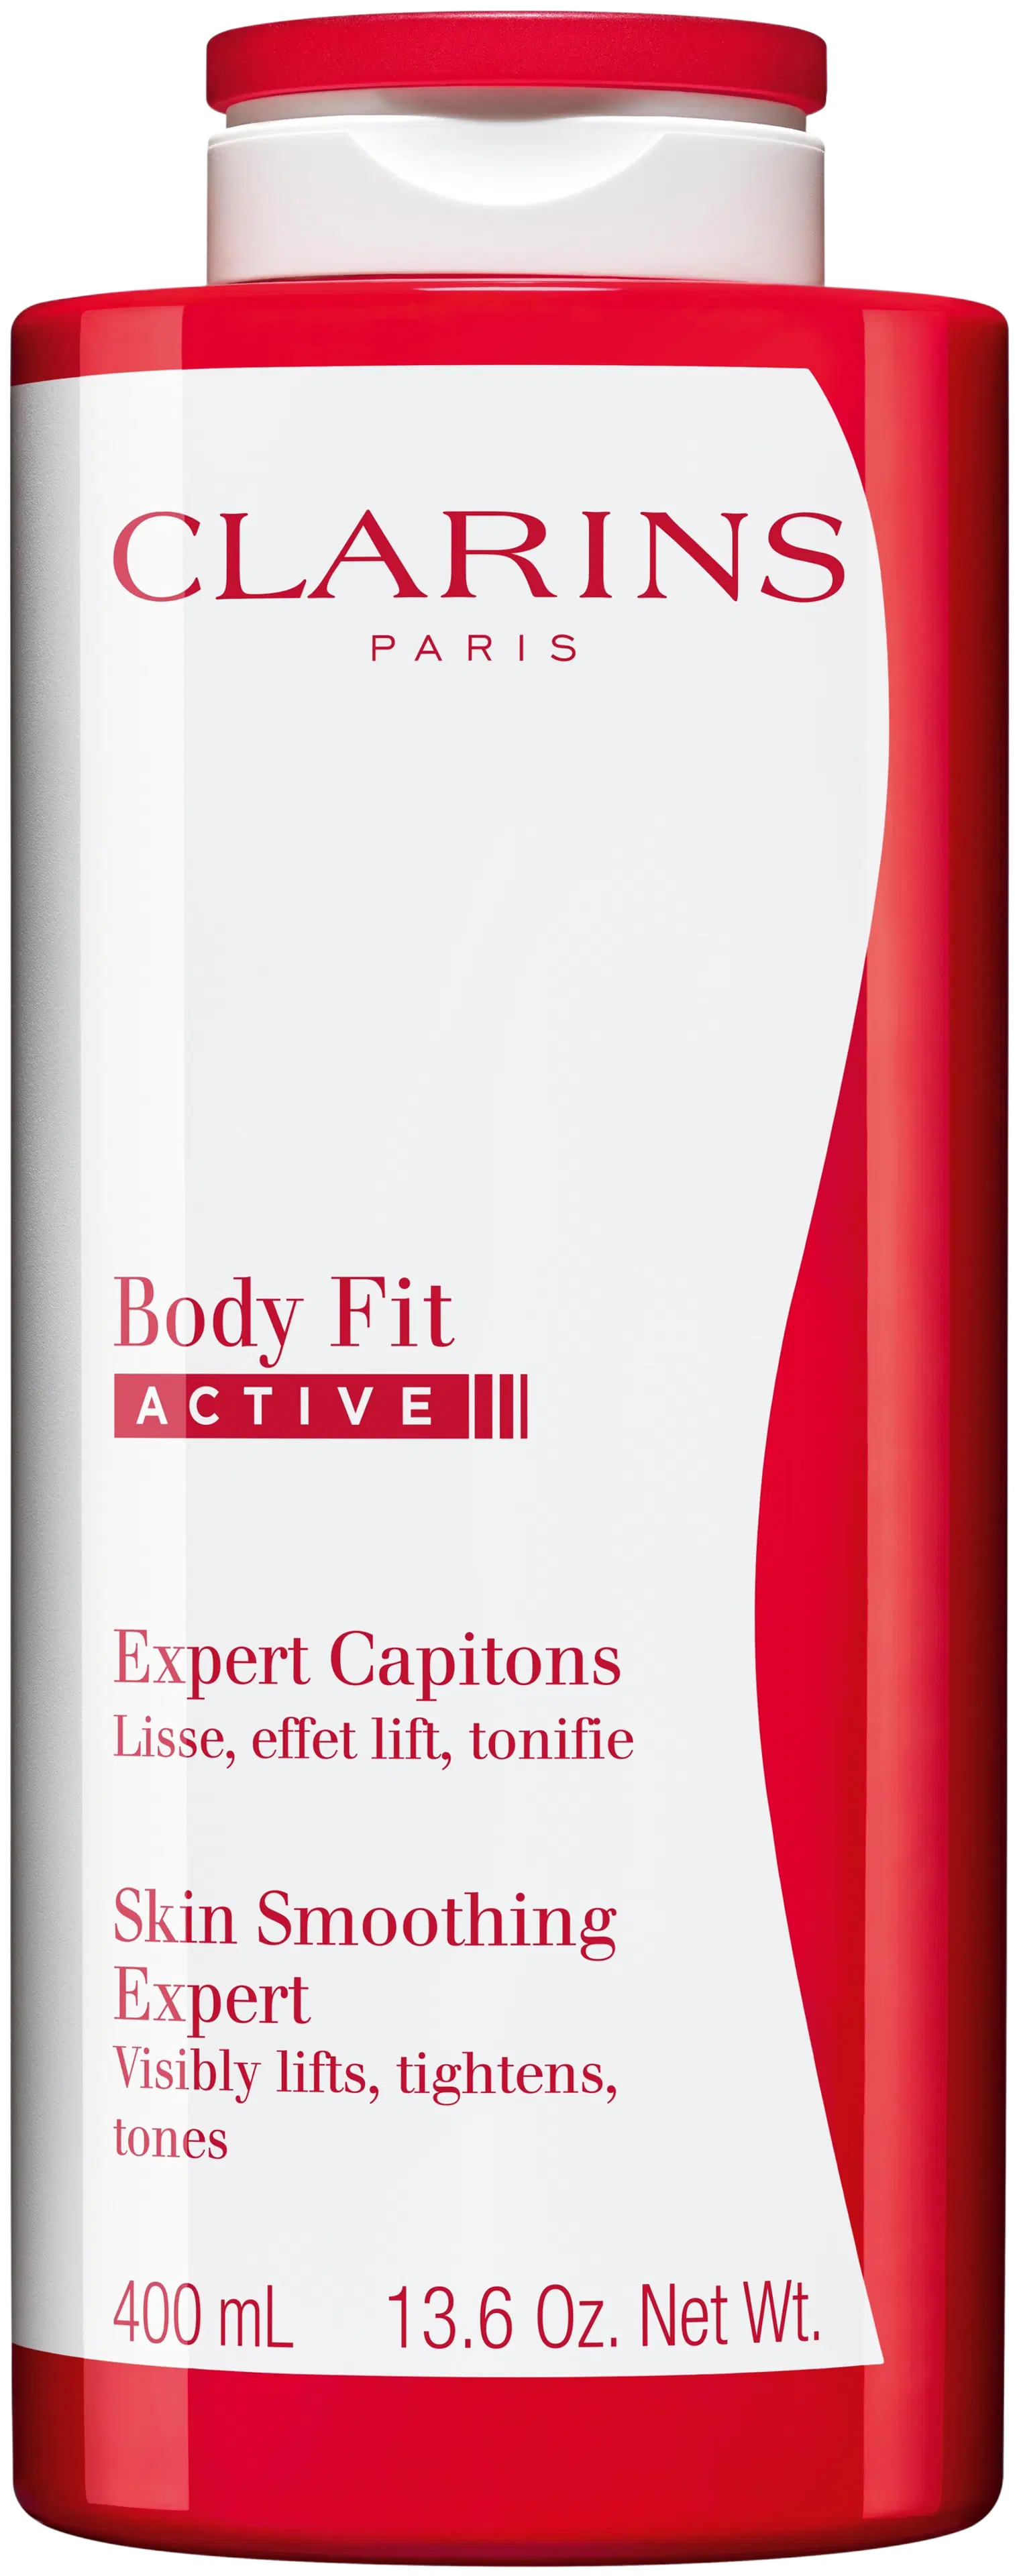 Clarins Body Fit Active selluliittihoito 400 ml 